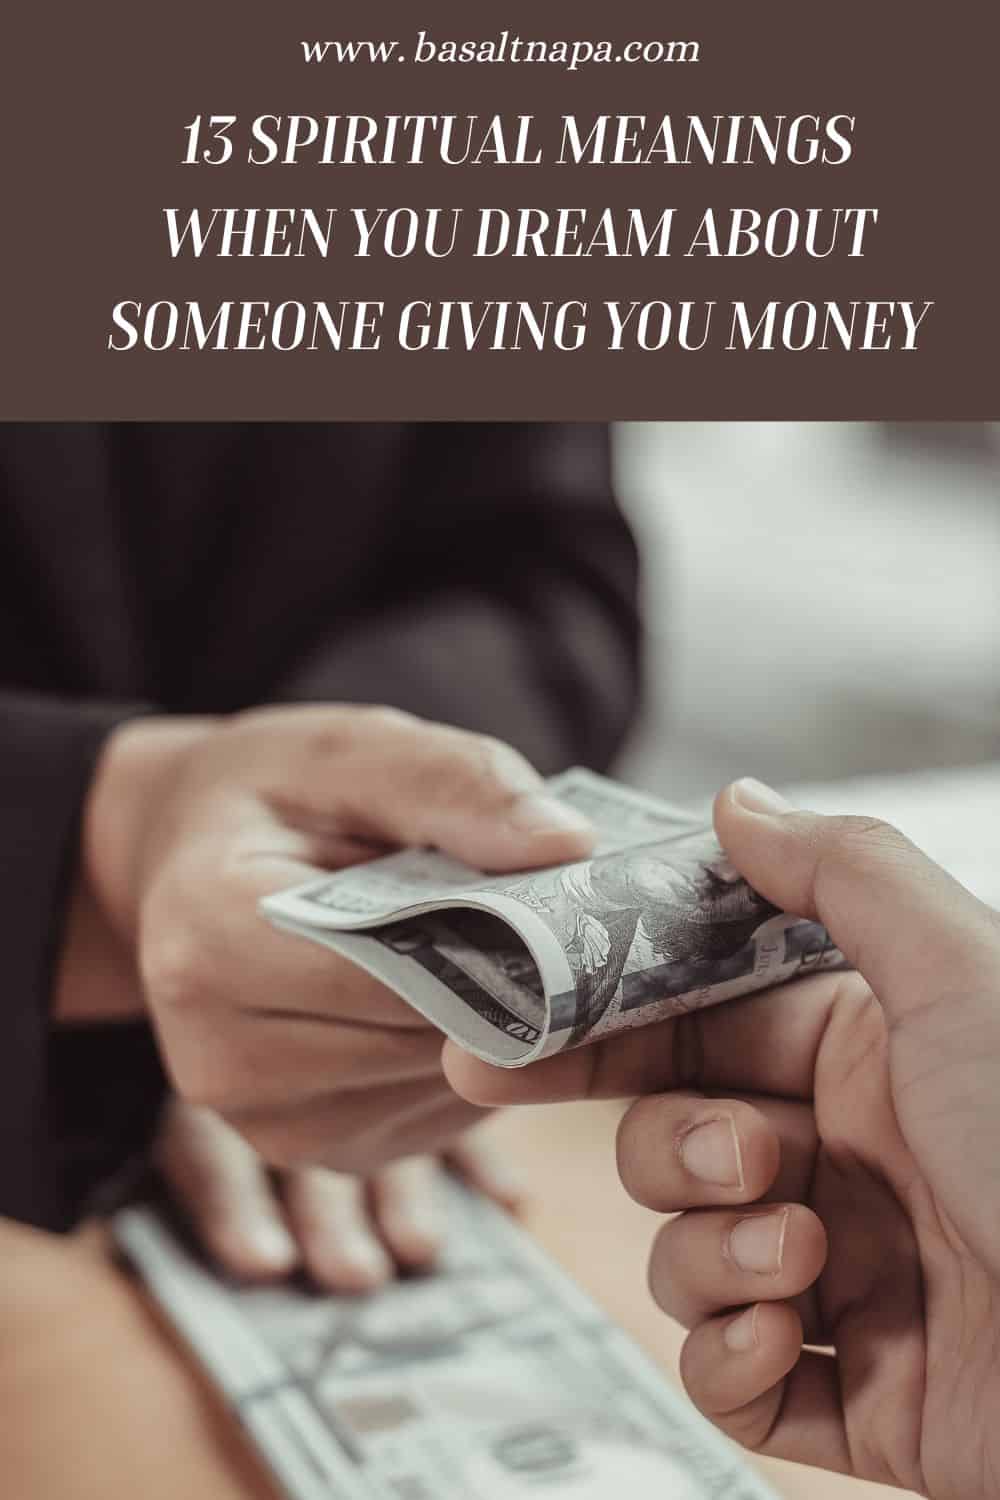 13 Spiritual Meanings When You Dream About Someone Giving You Money